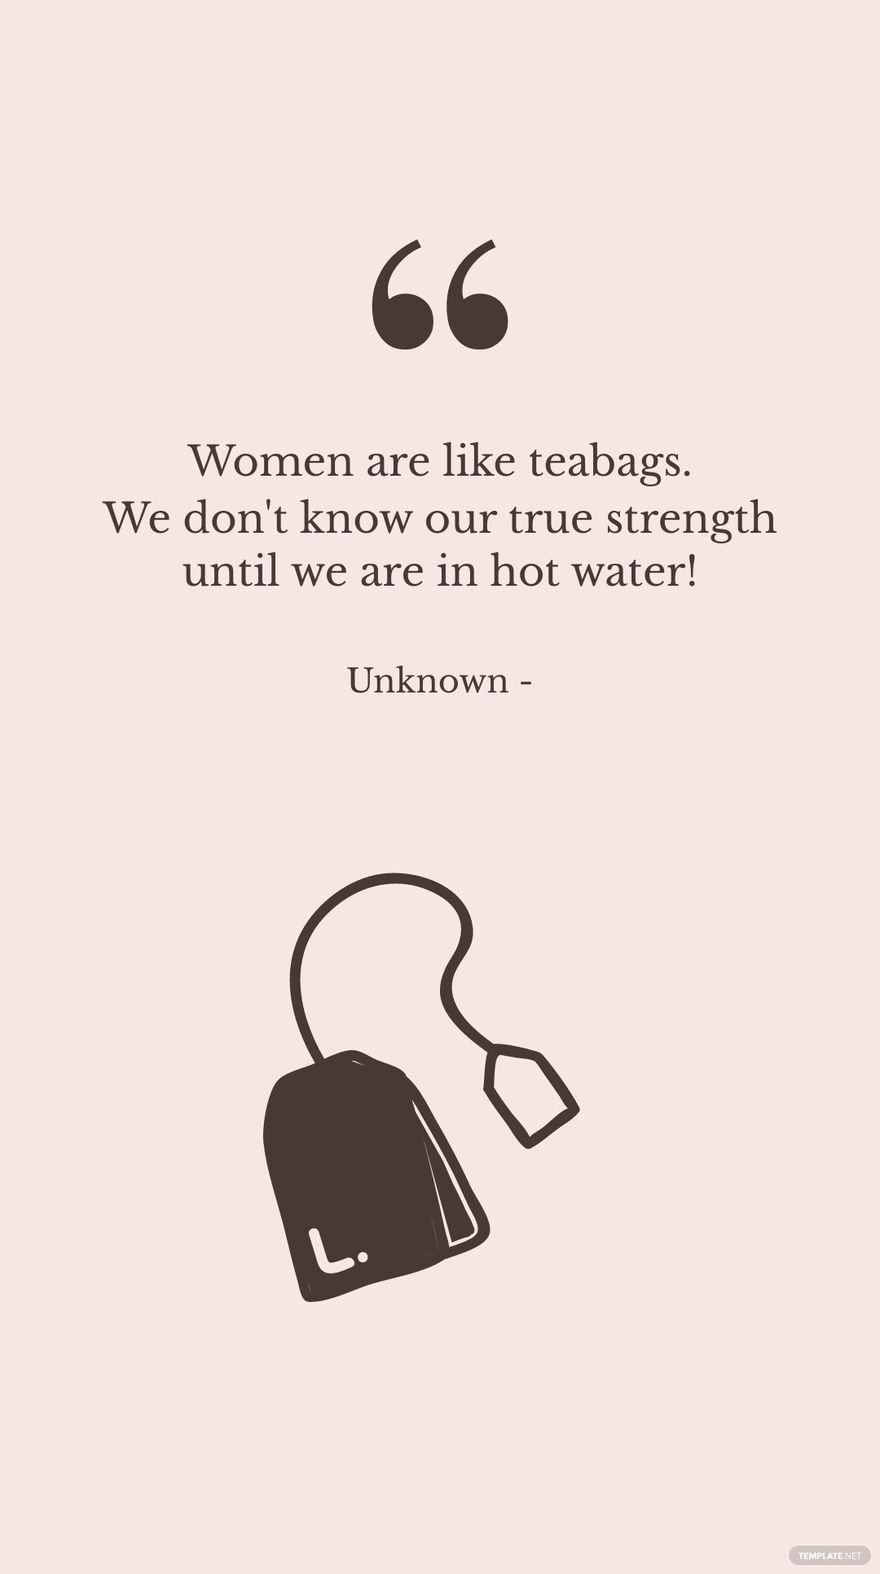 Unknown - Women are like teabags. We don't know our true strength until we are in hot water!